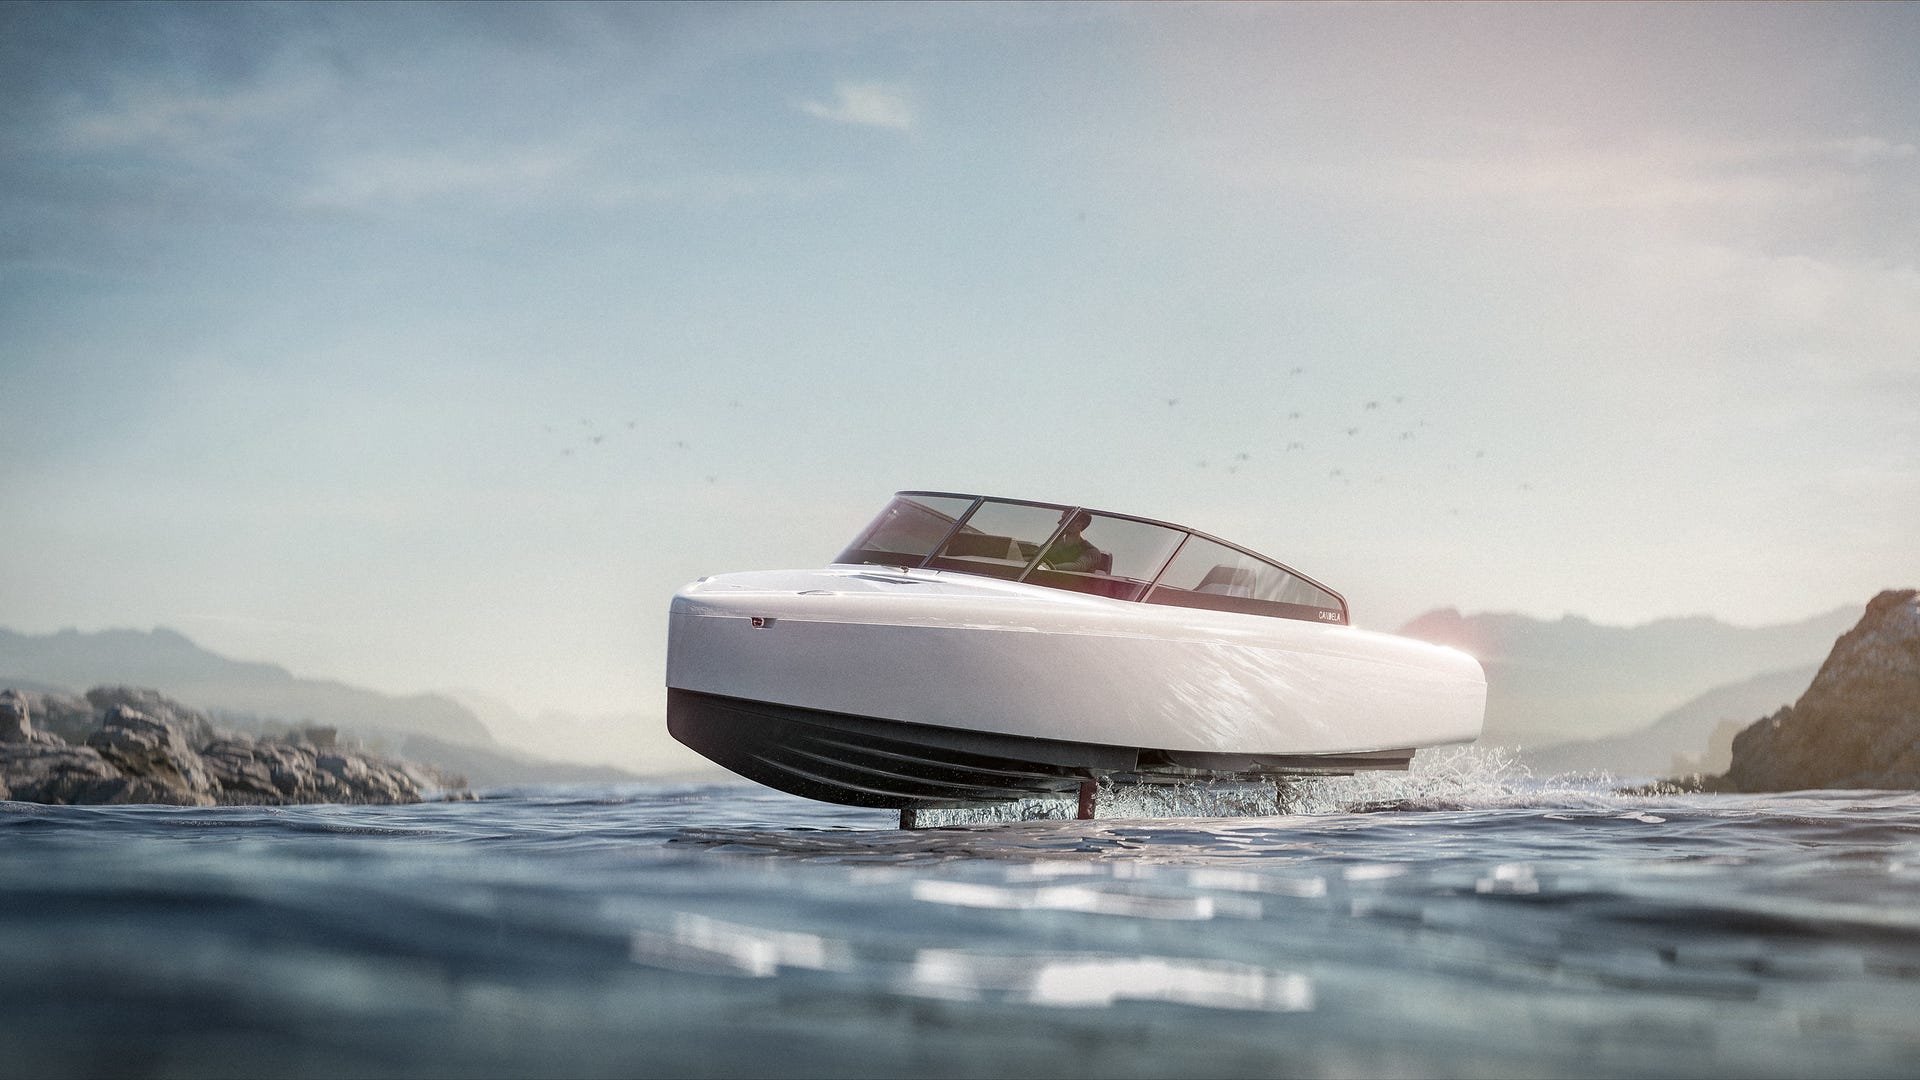 This All-Electric Hydrofoil Boat Lets You Fly Above the Waves - CNET